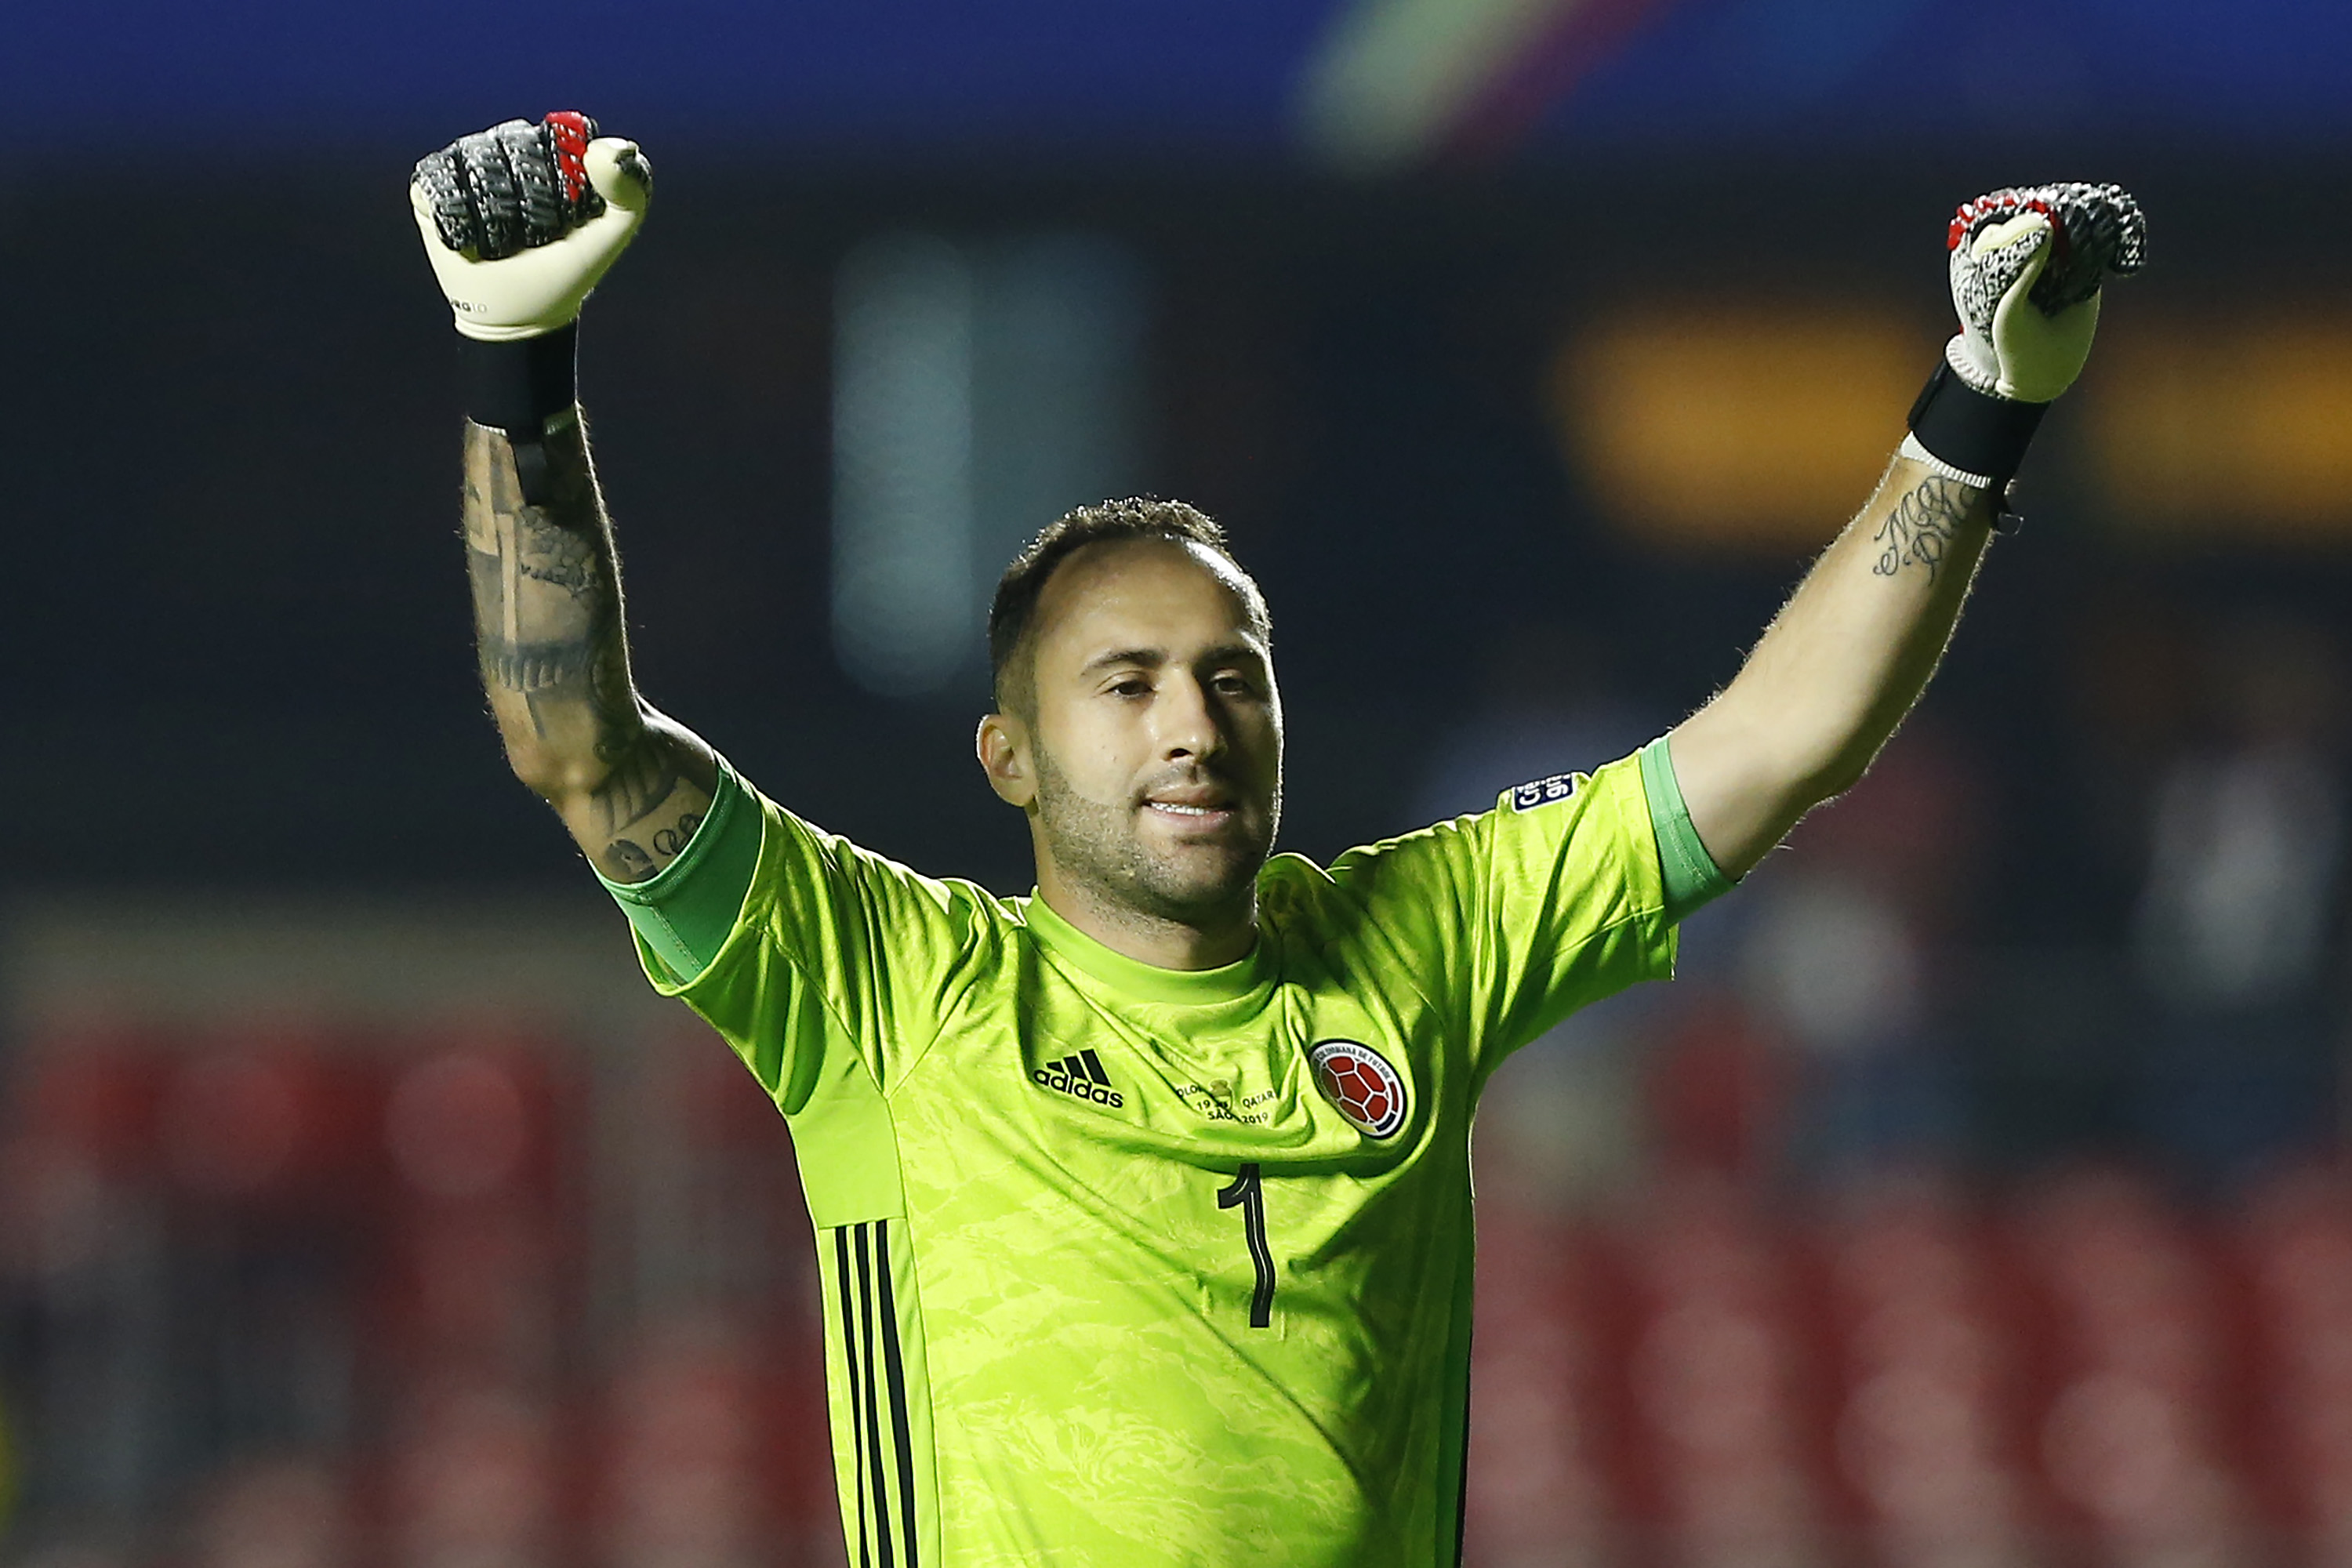 SAO PAULO, BRAZIL - JUNE 19: David Ospina of Colombia celebrates after winning during the Copa America Brazil 2019 group B match between Colombia and Qatar at Morumbi Stadium on June 19, 2019 in Sao Paulo, Brazil. (Photo by Wagner Meier/Getty Images)